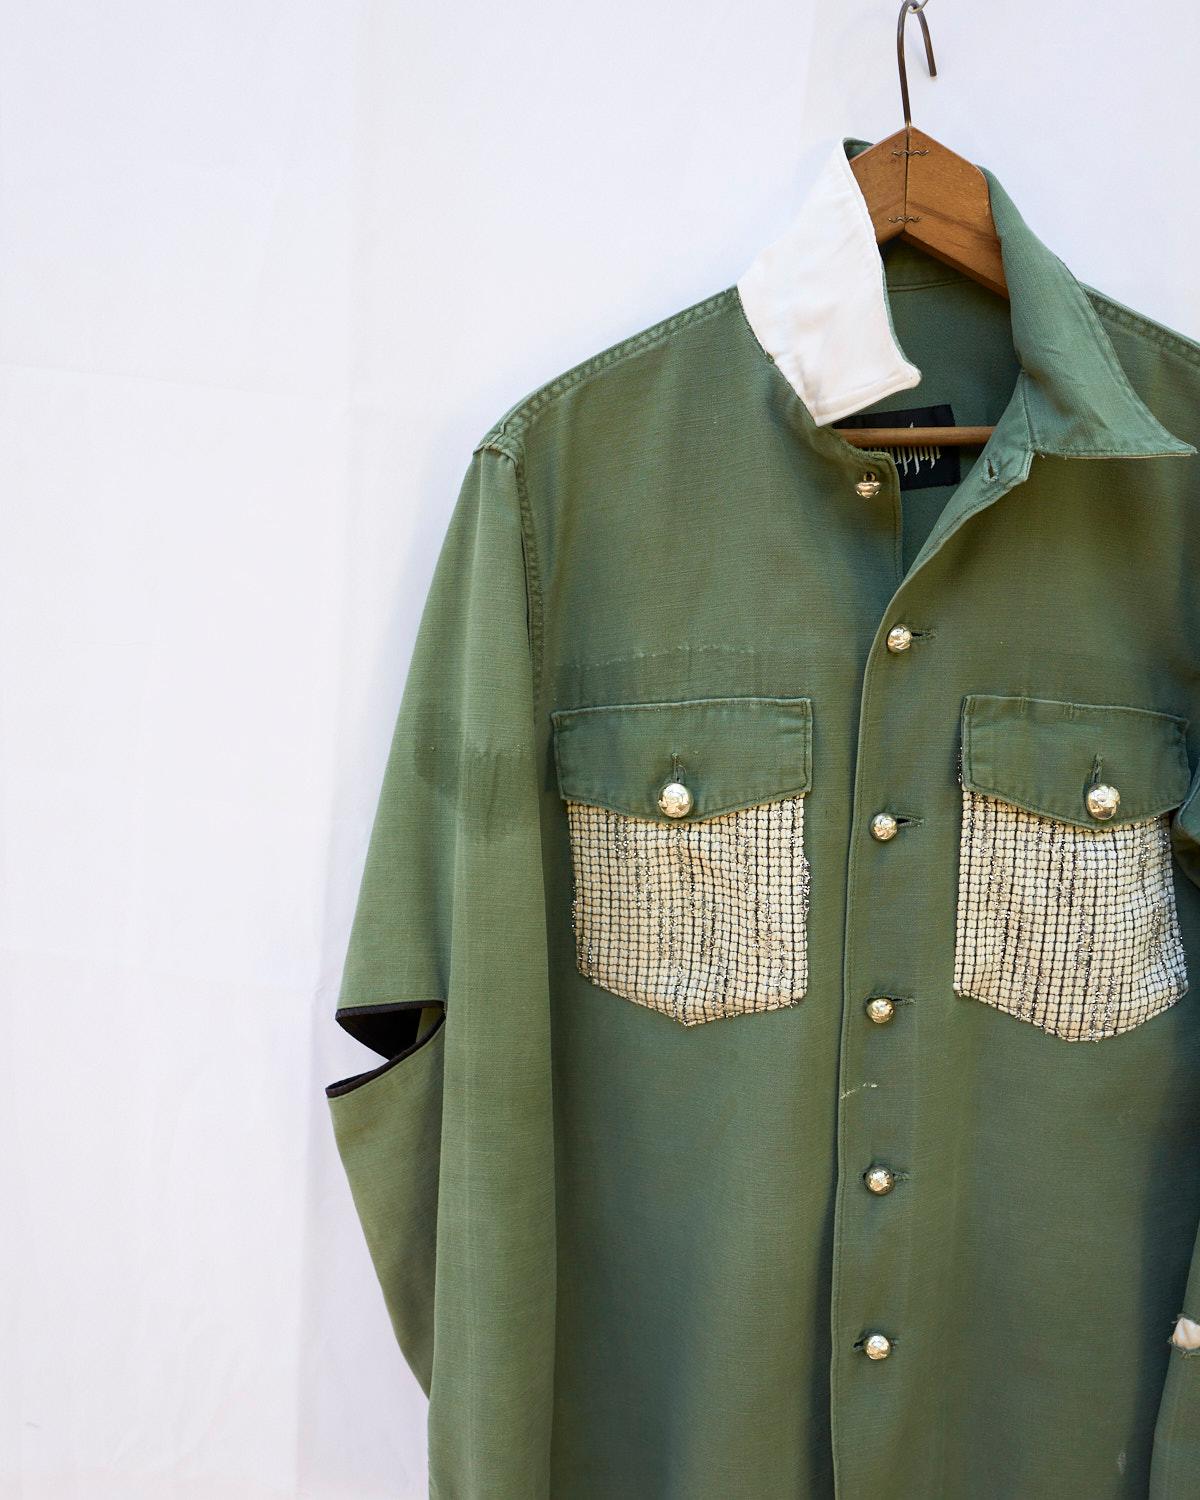 Jacket Cotton Green Embellished Original Vintage Military Repurposed with Designer White Silver Lurex Tweed, White Silk Collar and Vintage Collectible Military Vintage Gold Tone Buttons in Brass.

100% Sustainable Created with Vintage and